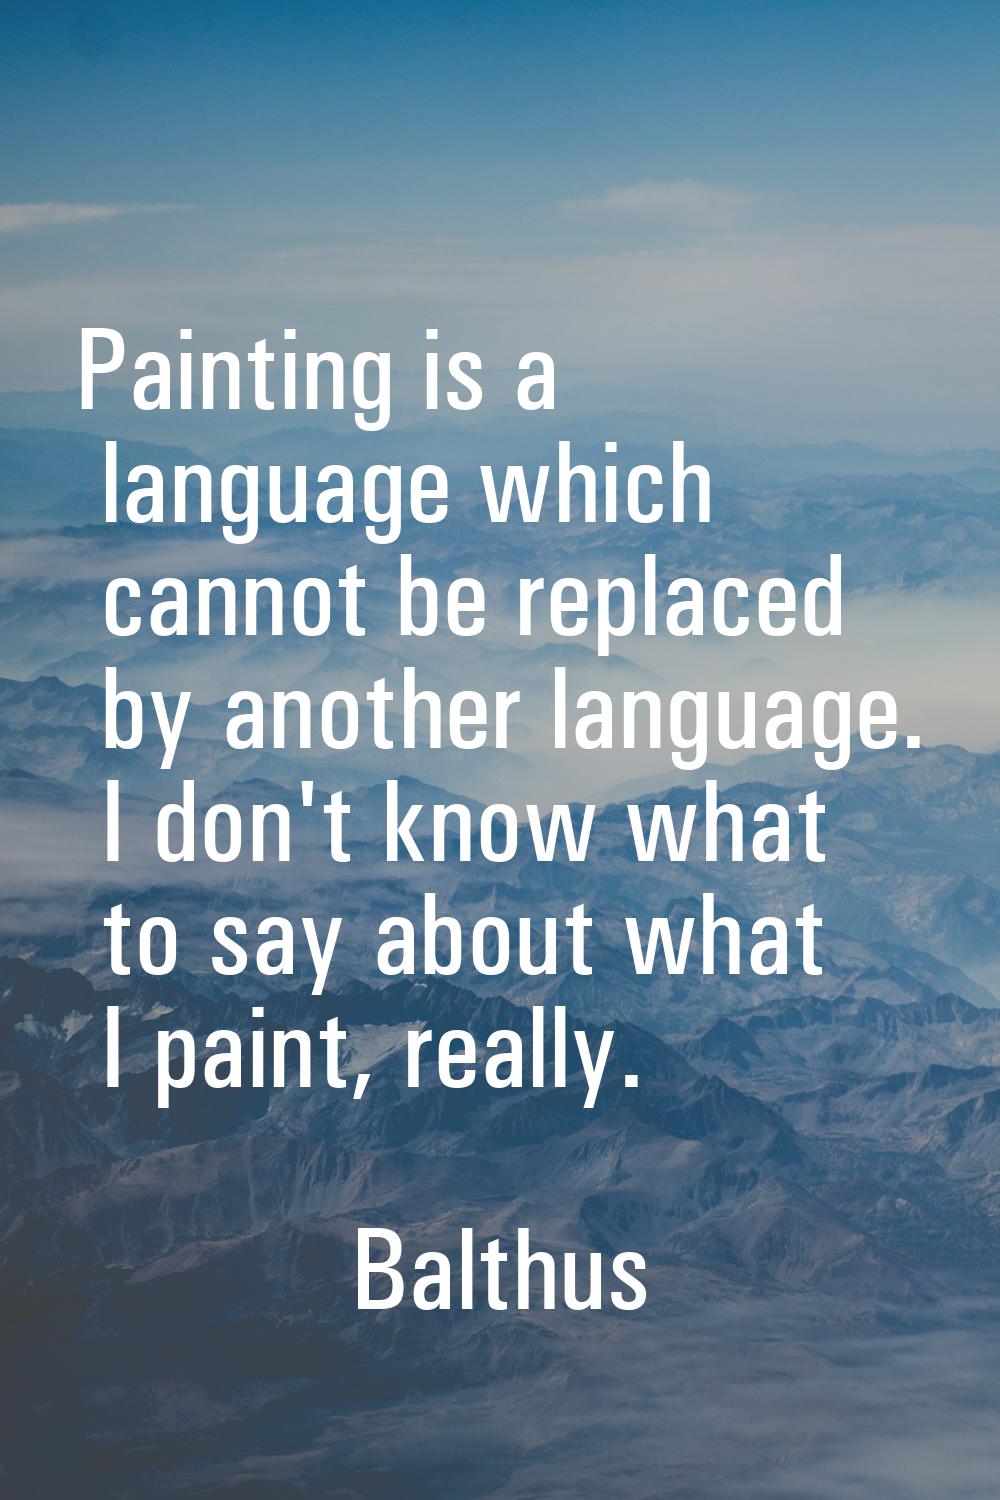 Painting is a language which cannot be replaced by another language. I don't know what to say about